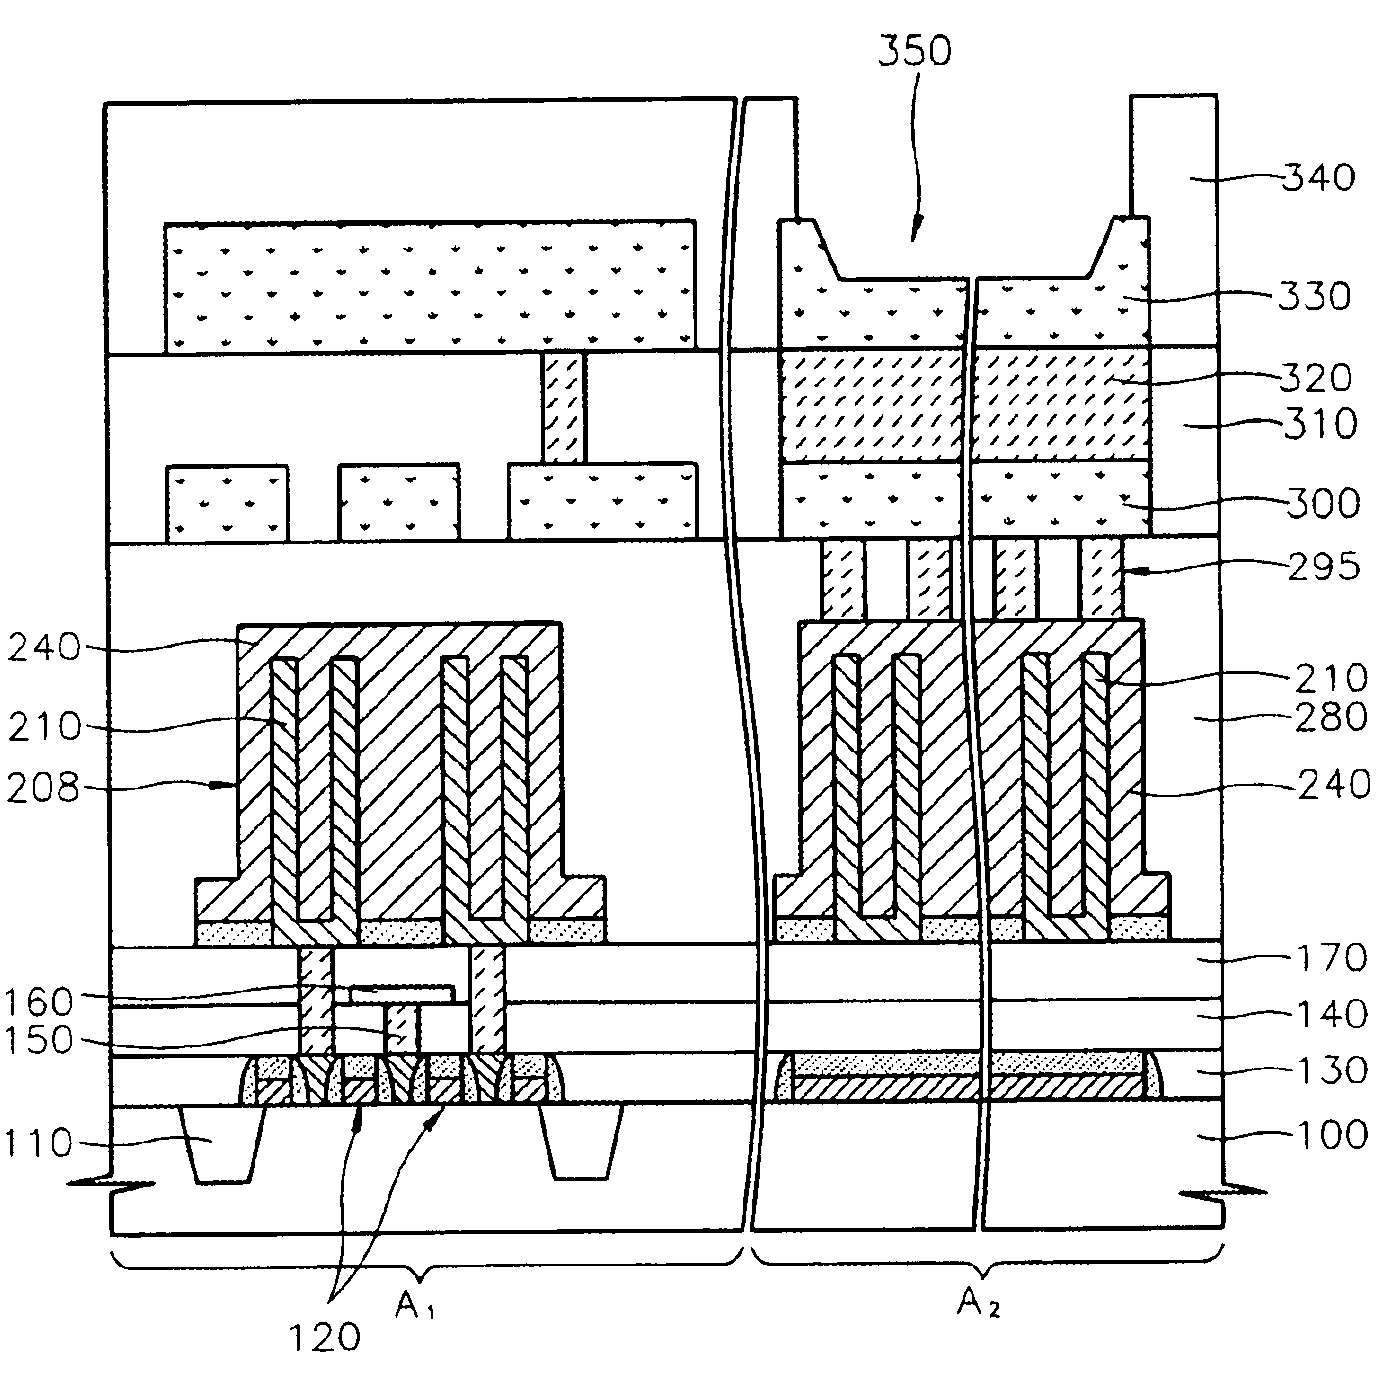 Bonding pad structure of a semiconductor device